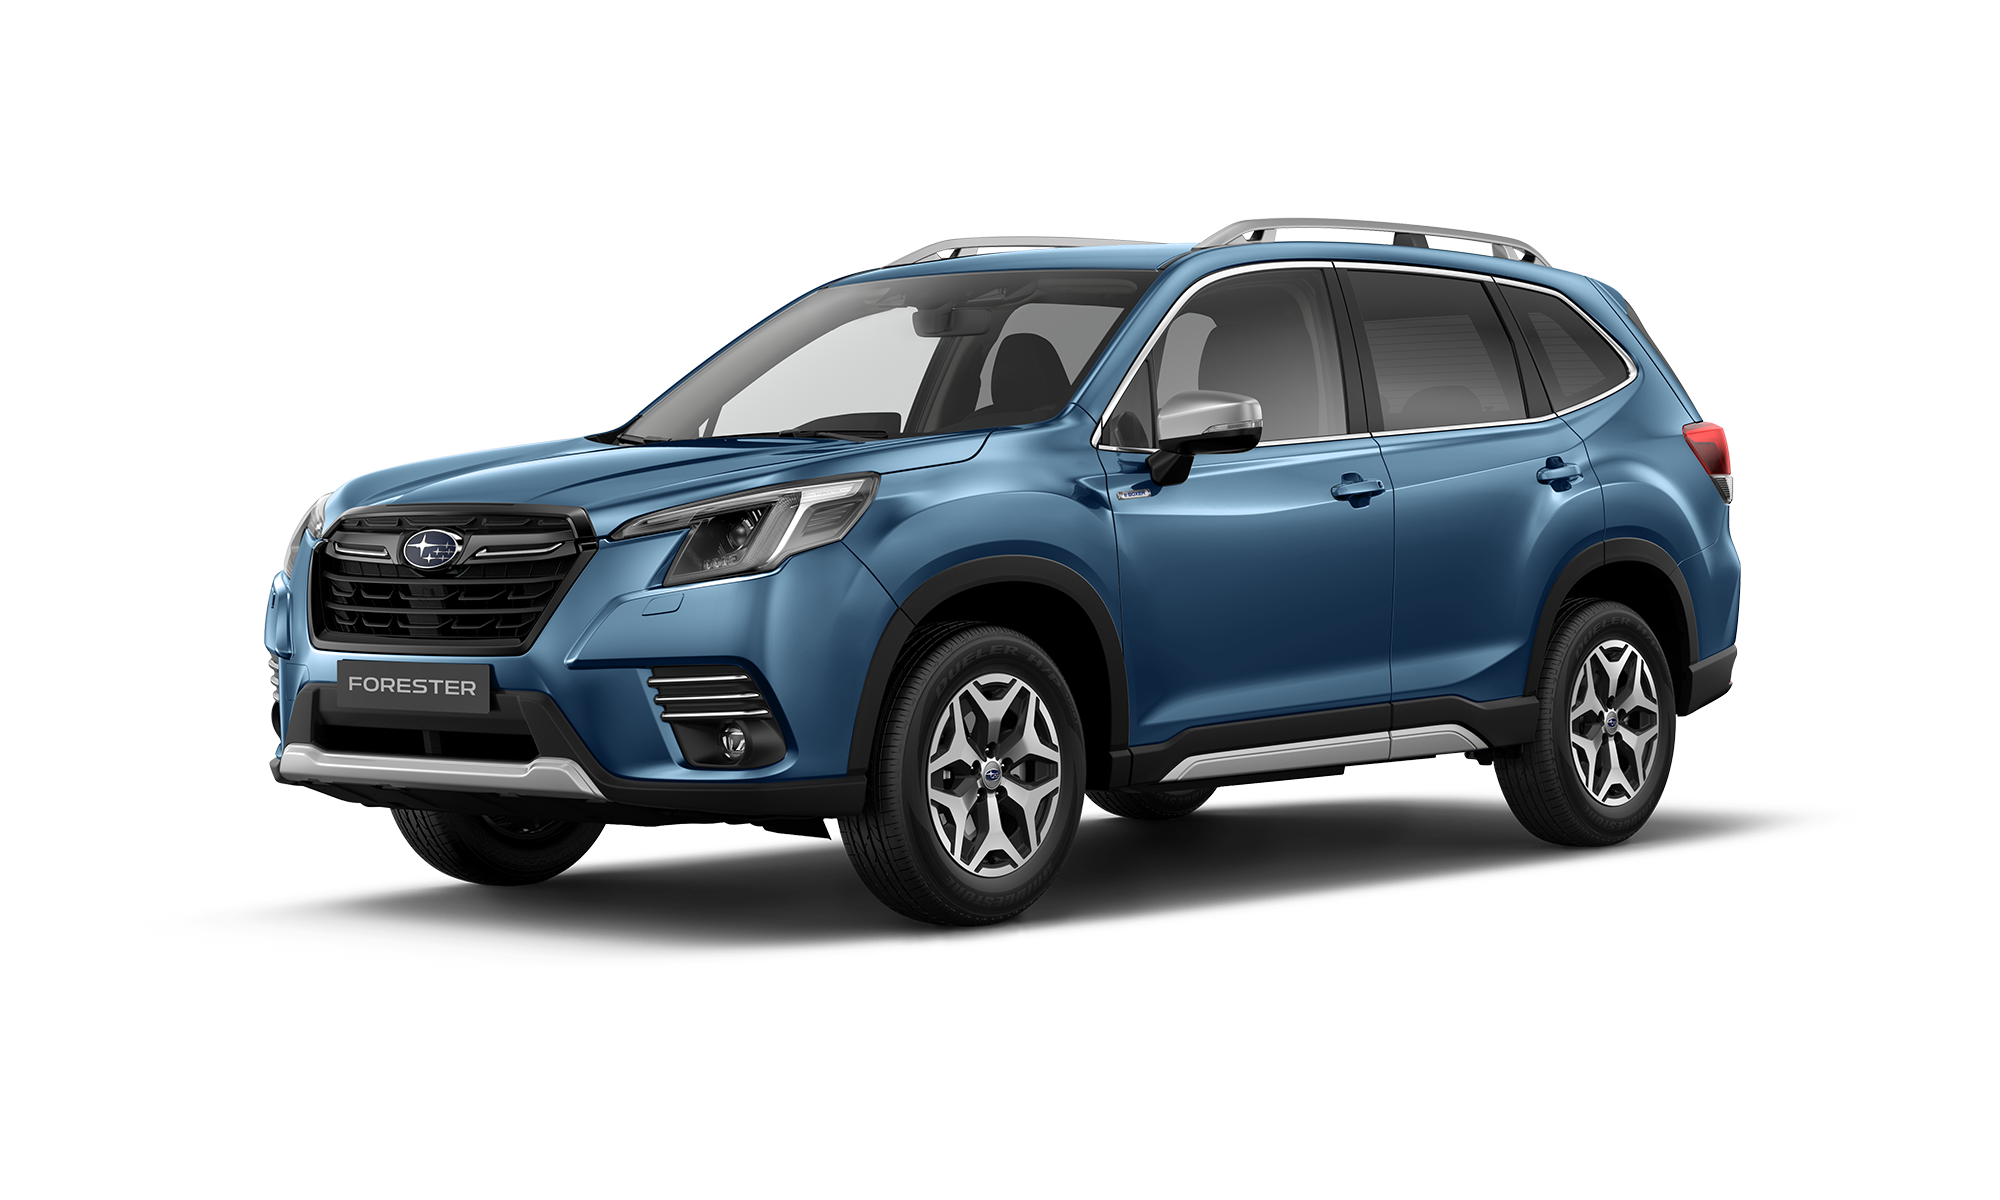 https://www.subaru.be/media/mkgiby04/be-lineup-2022-forester-comfort-transparent.png?anchor=center&mode=crop&width=640&height=360&rnd=132832800999700000